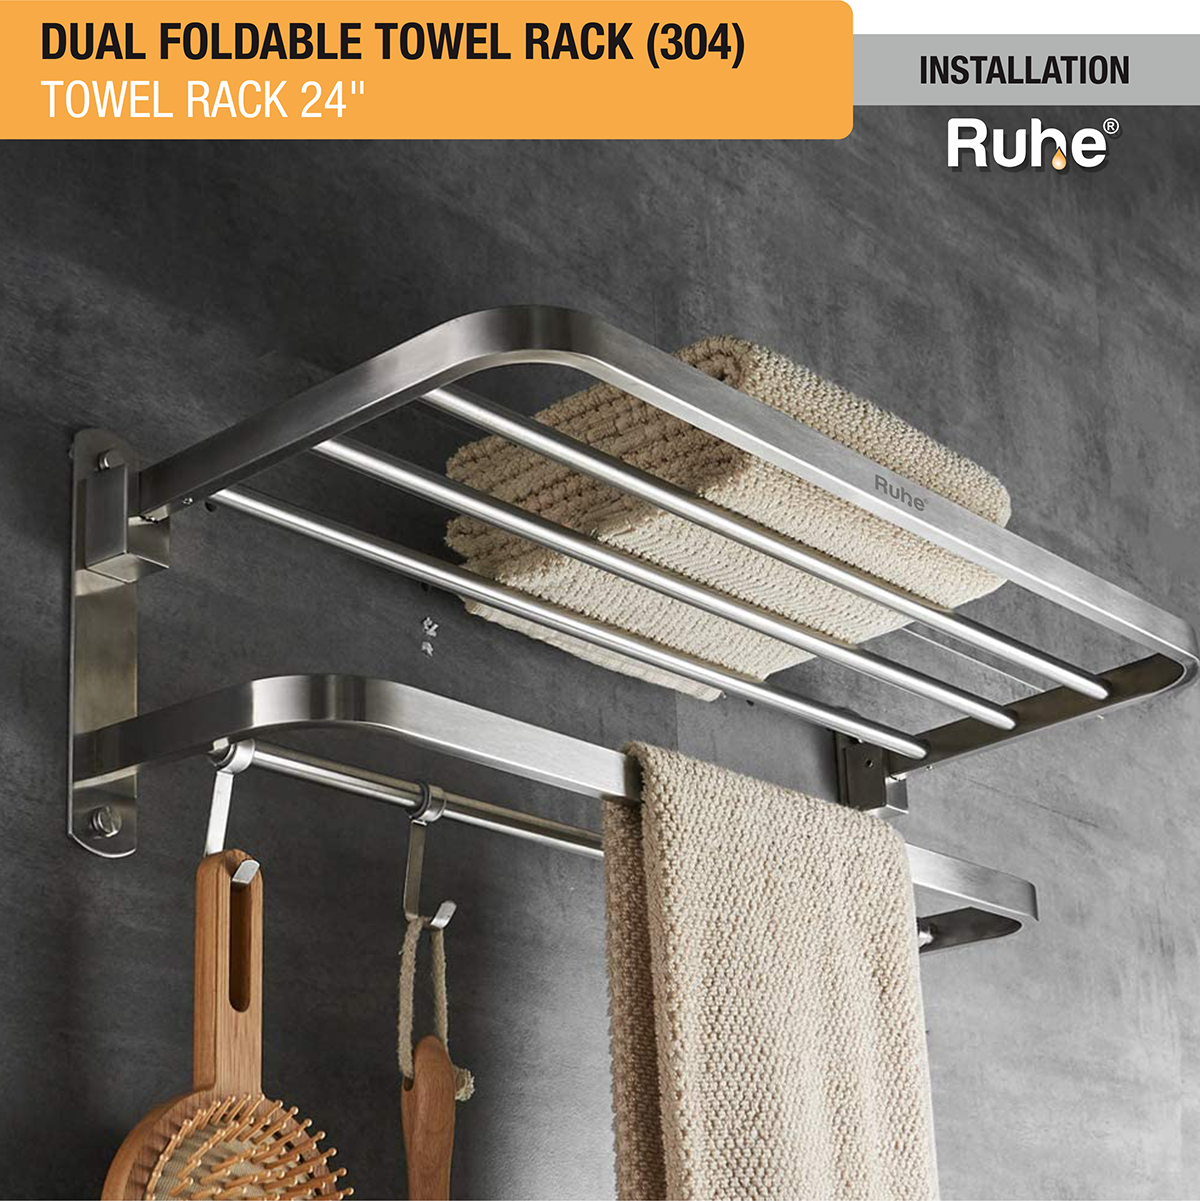 Dual Foldable 304-Grade Towel Rack (24 Inches) installation